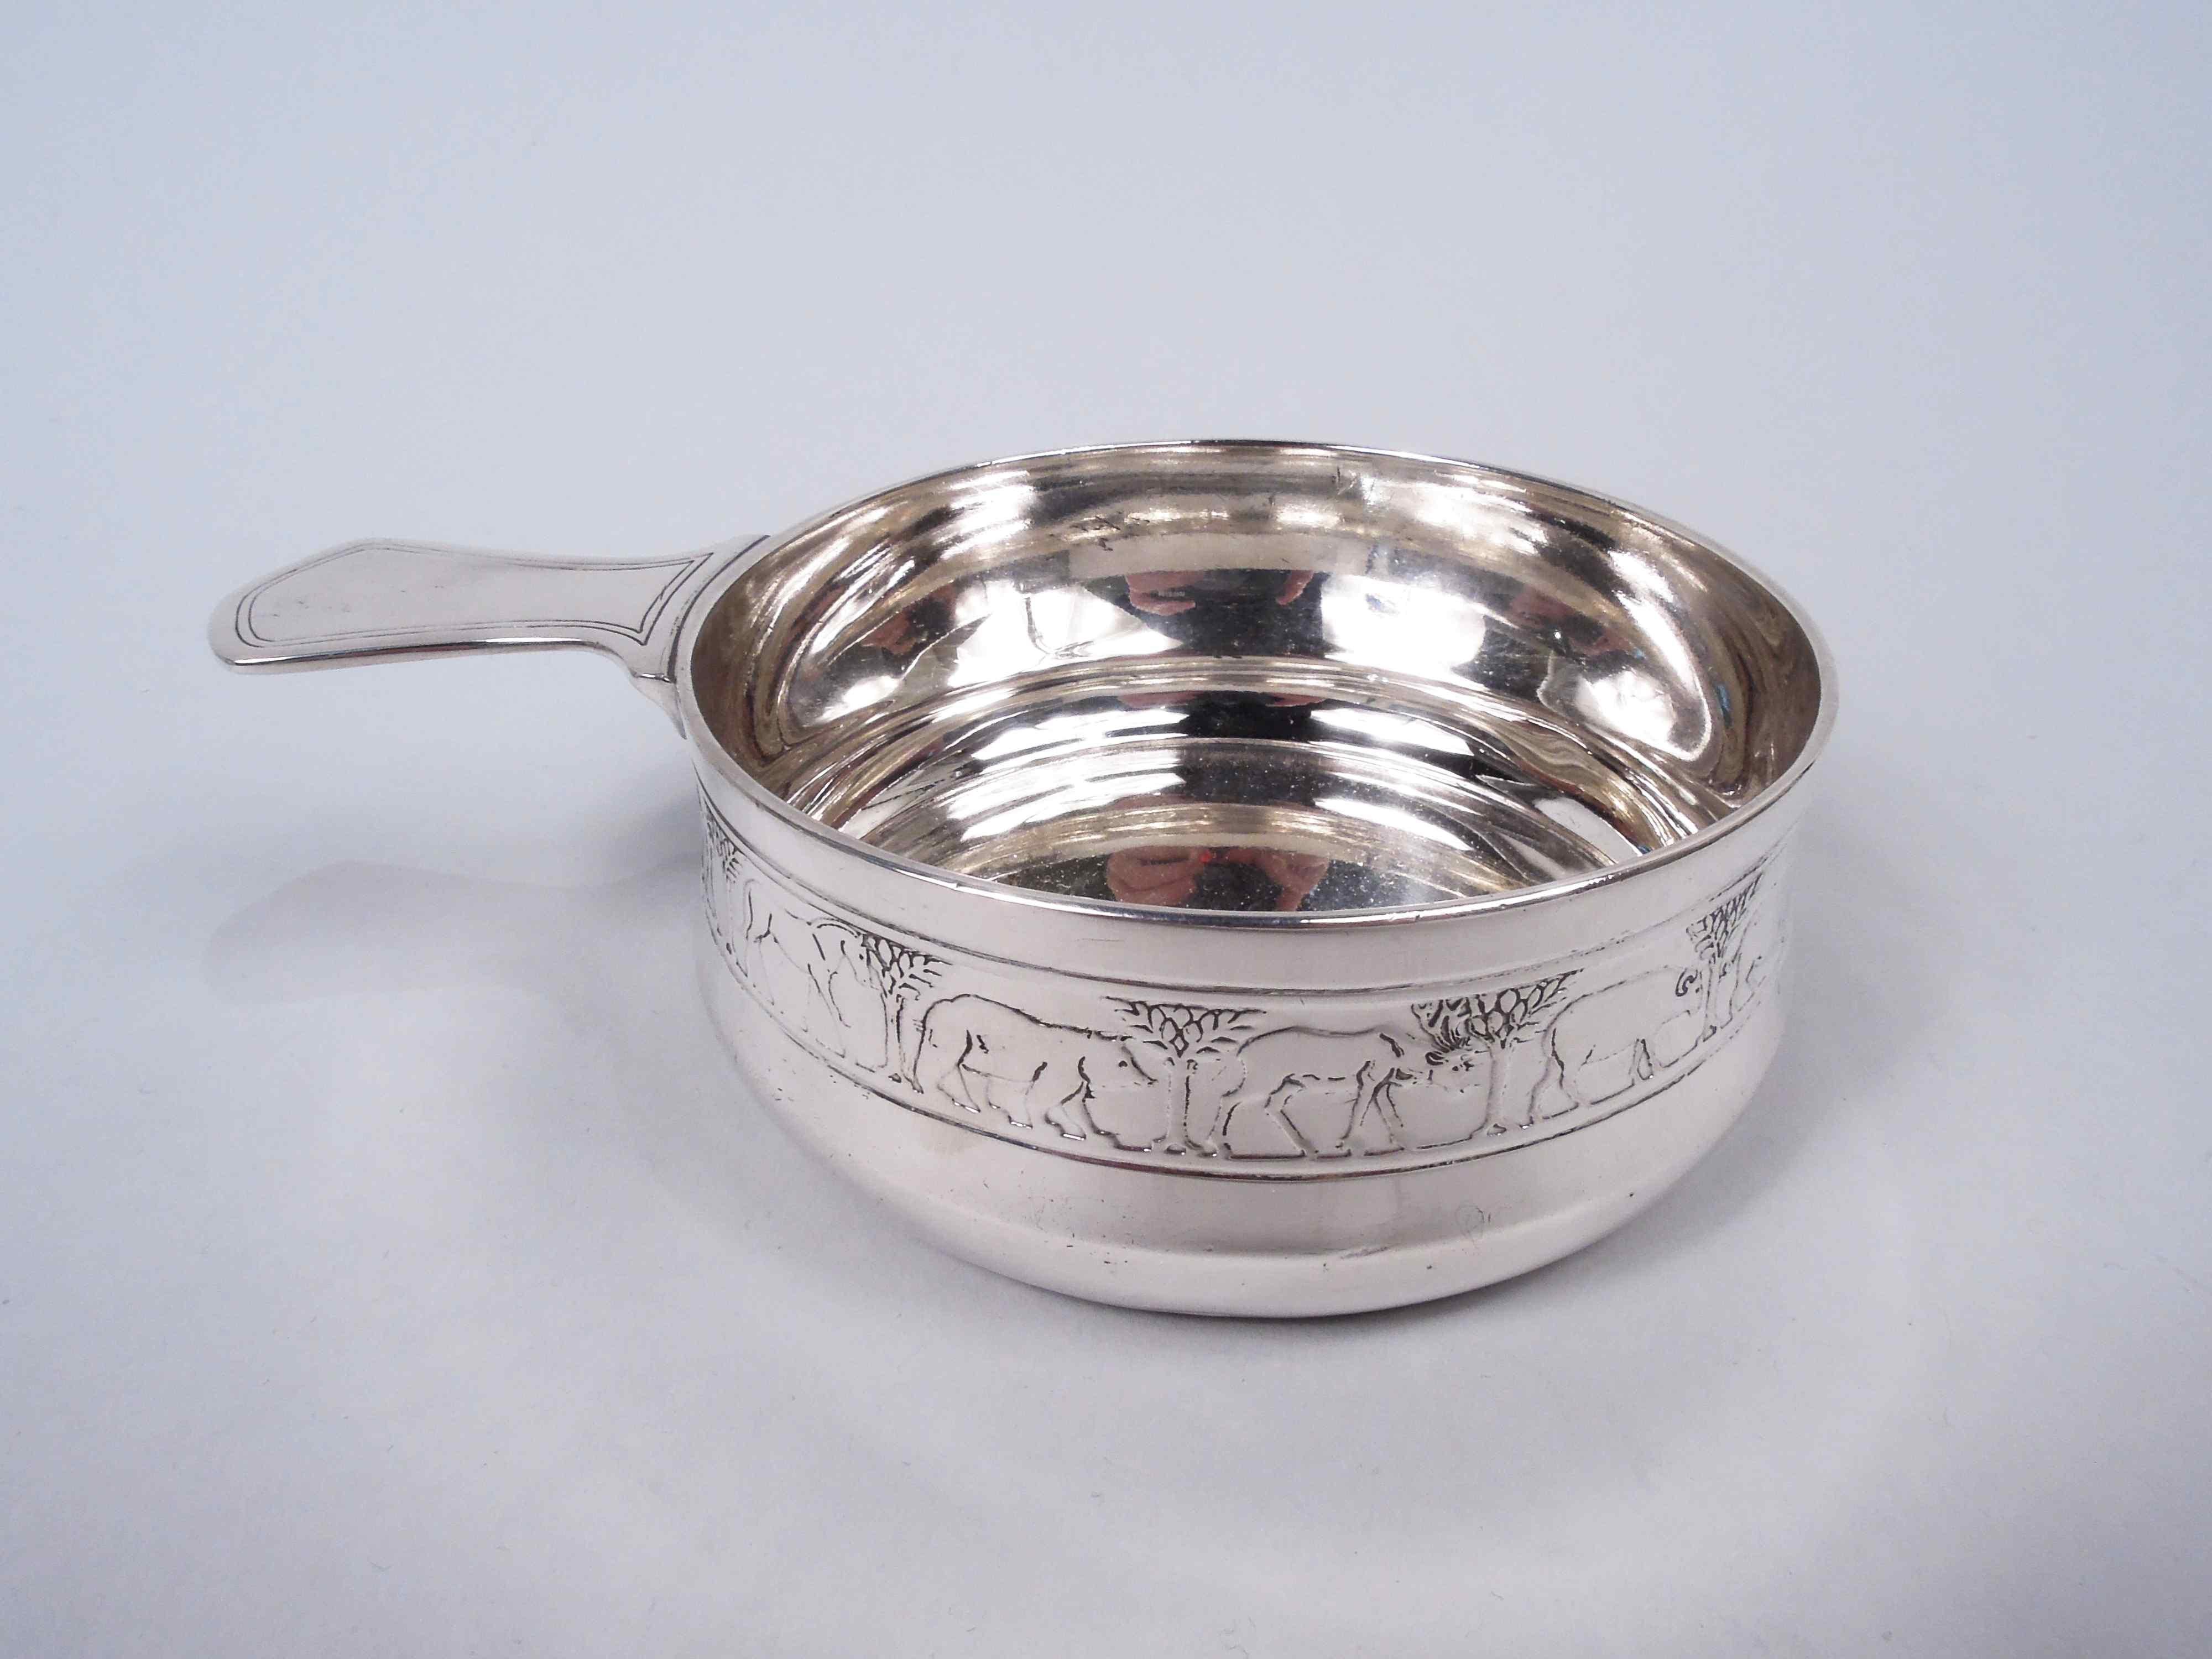 Modern sterling silver porringer with Noah’s Ark motif. Made by Tiffany & Co. in New York, ca 1926. Bellied bowl and solid shaped handle. On exterior is acid-etched frieze with a lion, camel, elephant, bear—and so on single file through the animal